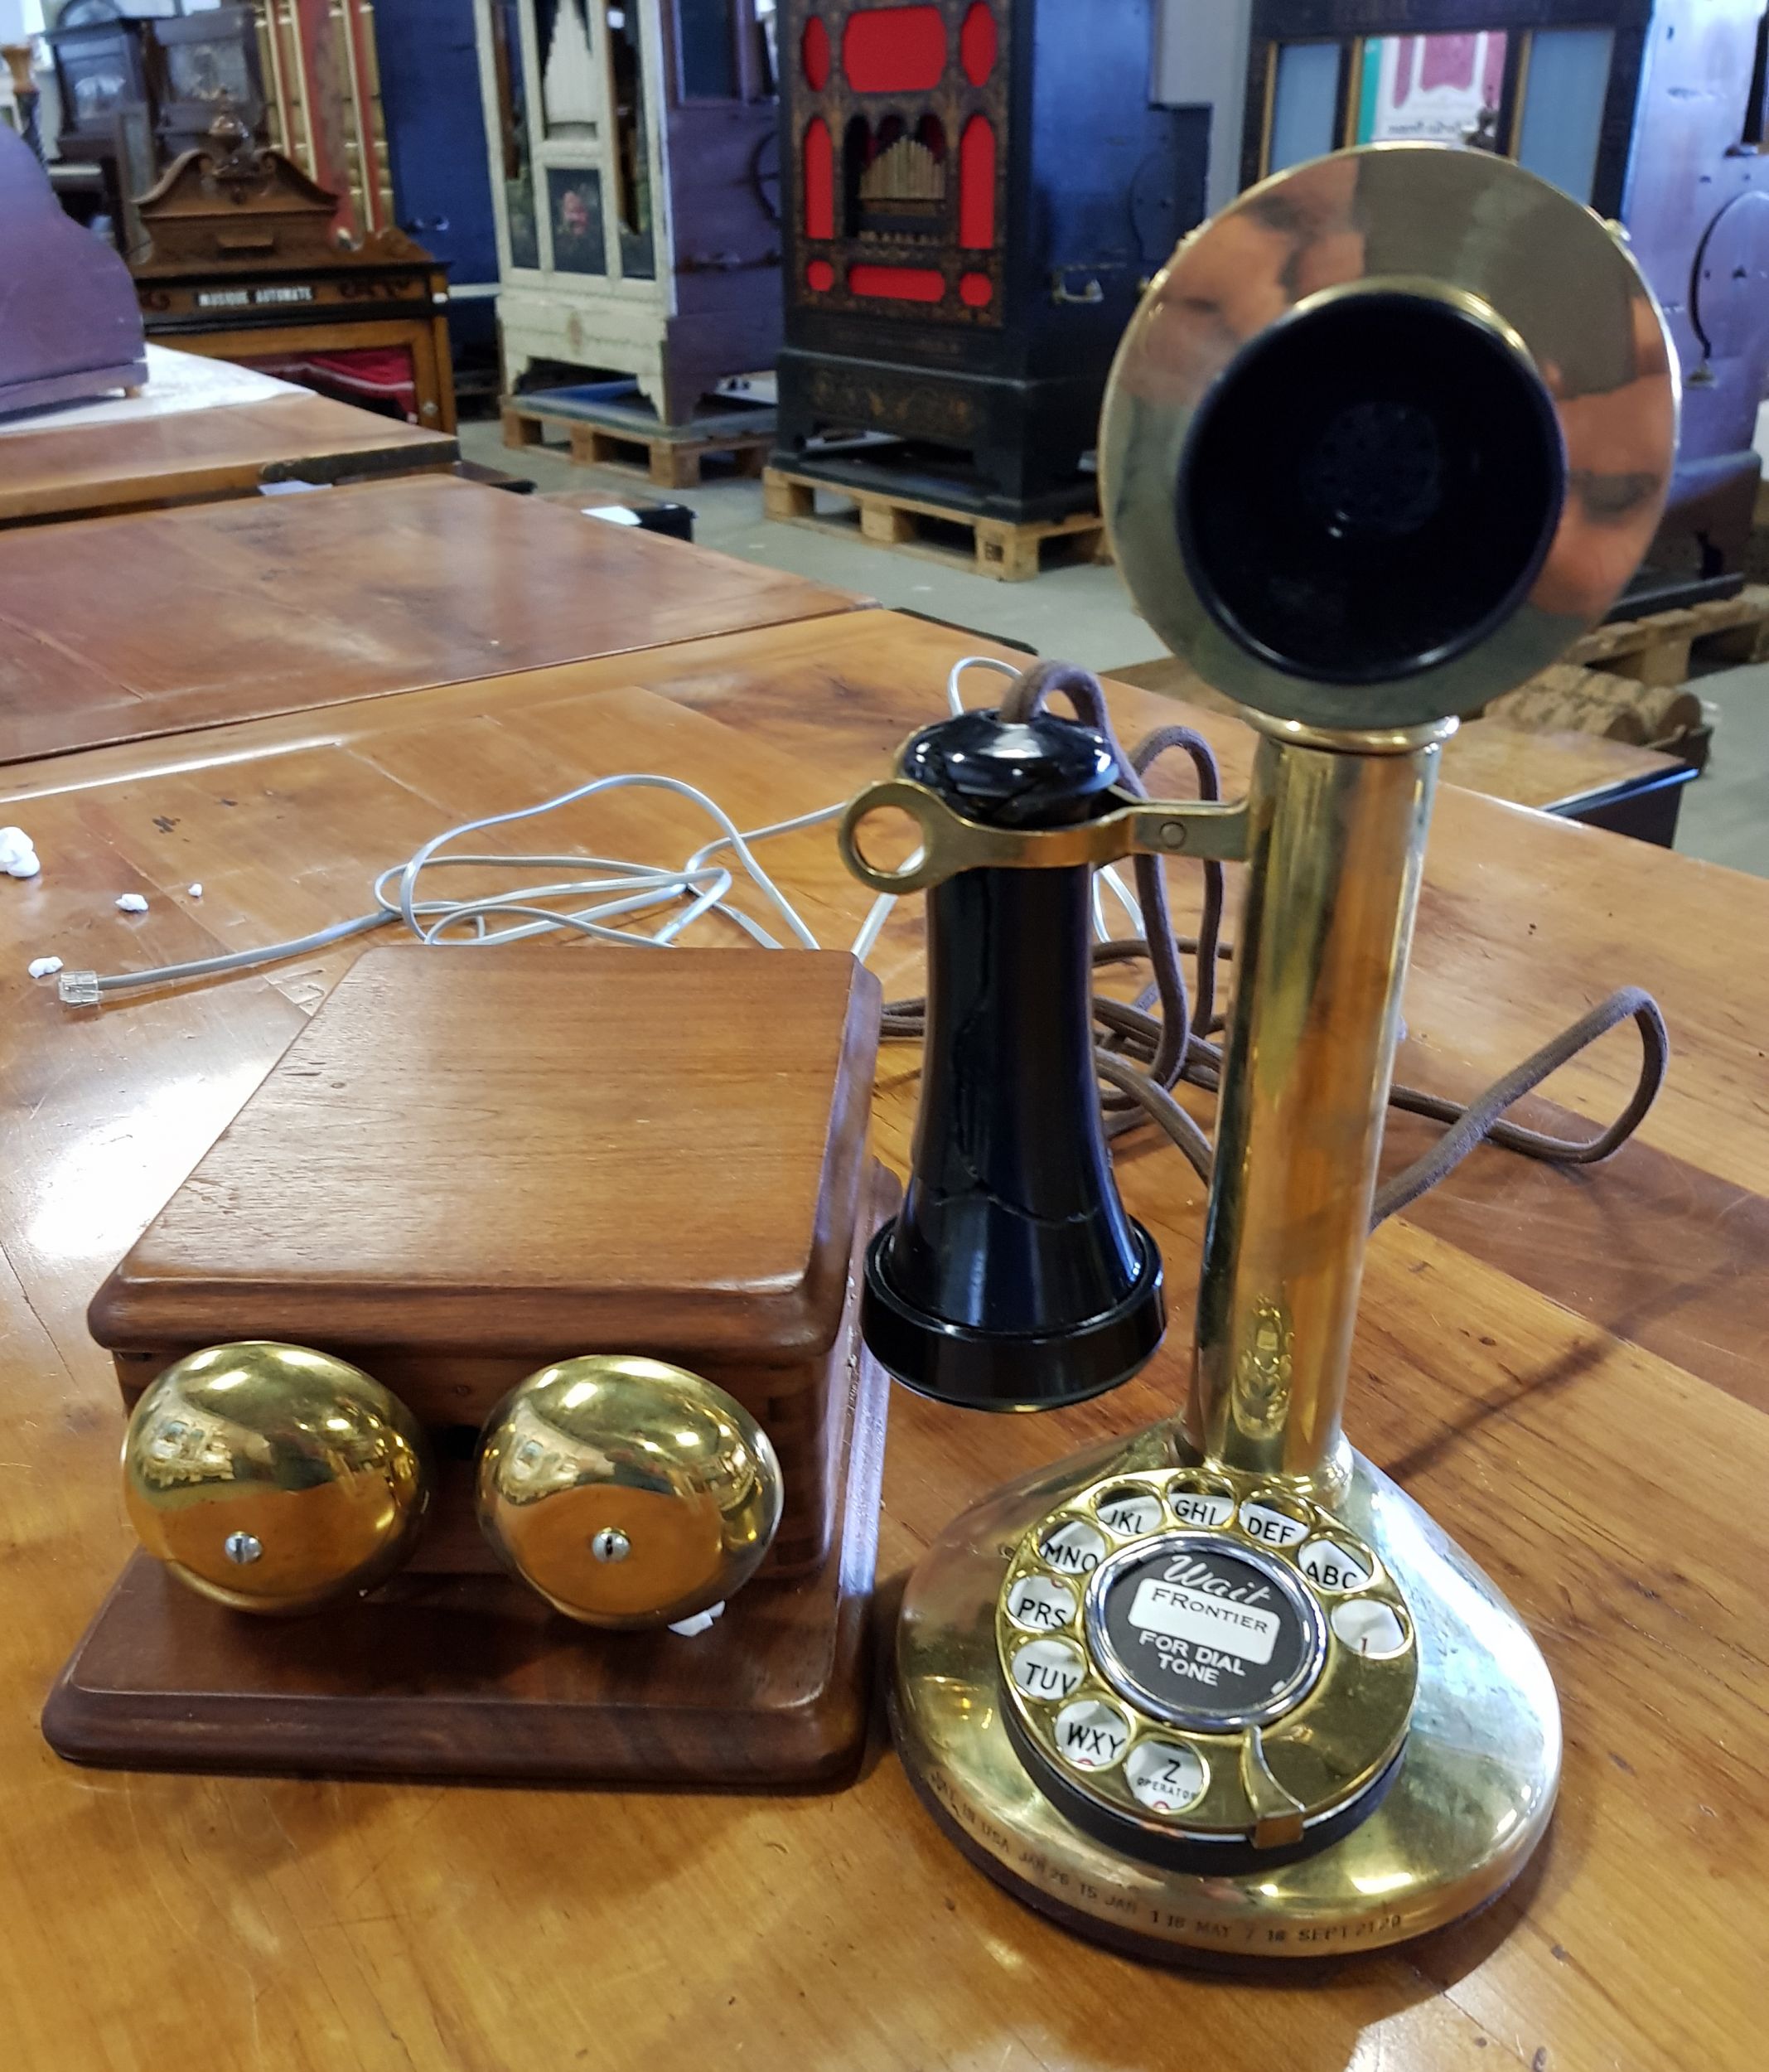 An old Telephone with a separate Ringbox